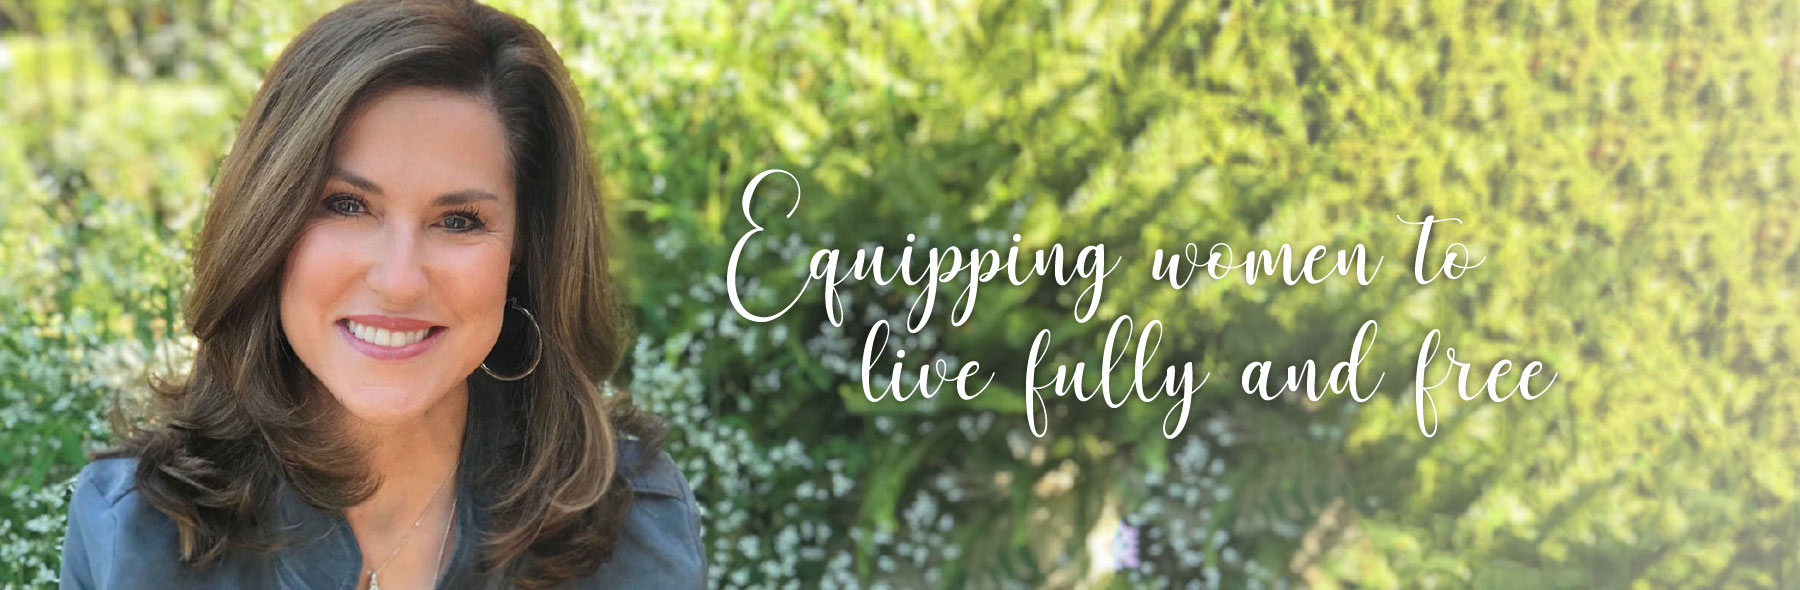 Sharon Jaynes | Equipping Women to Live Fully and Free